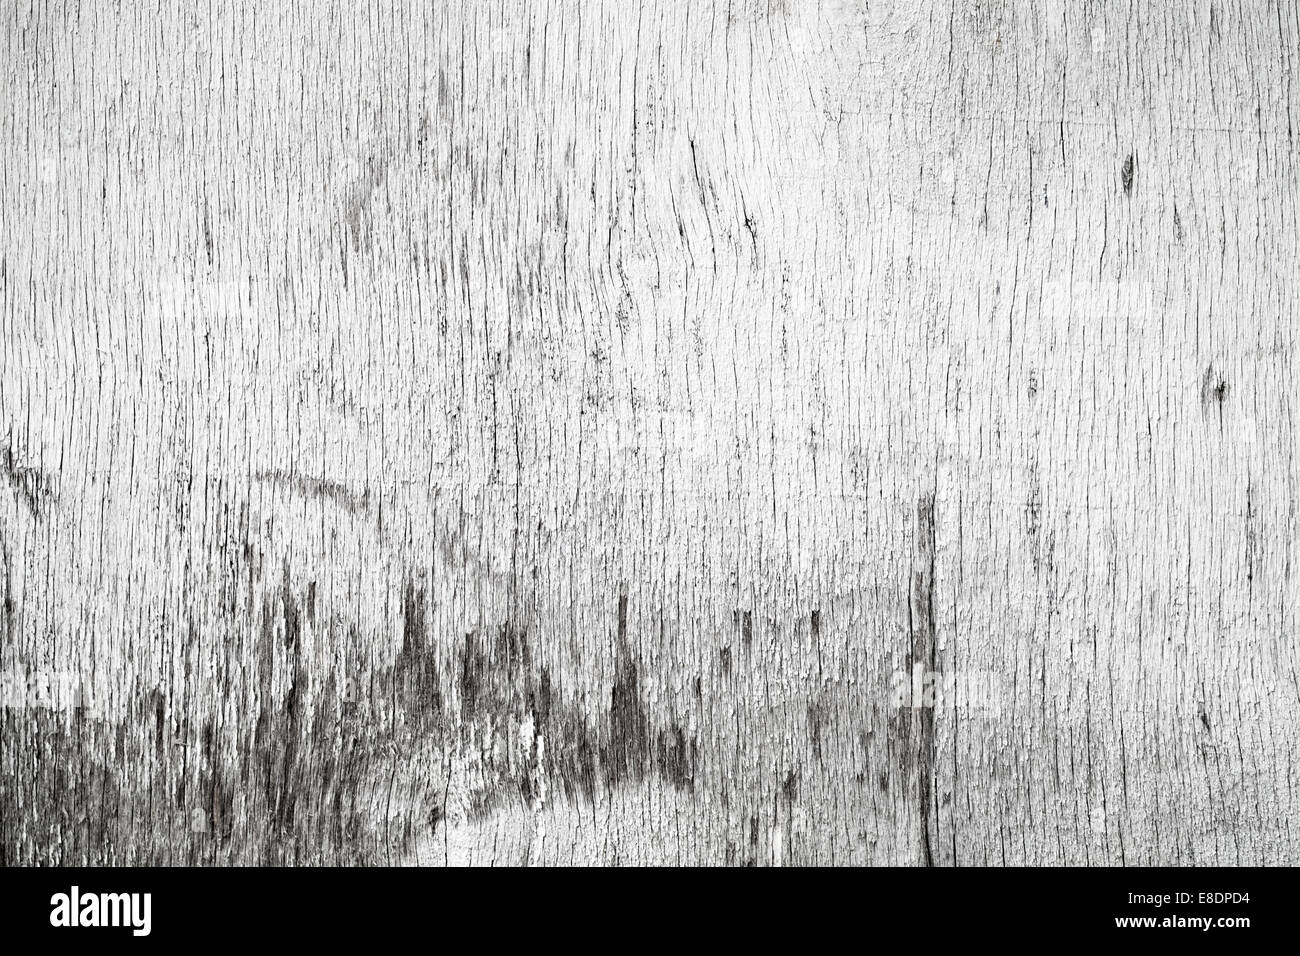 Detailed background texture of old white wooden surface Stock Photo